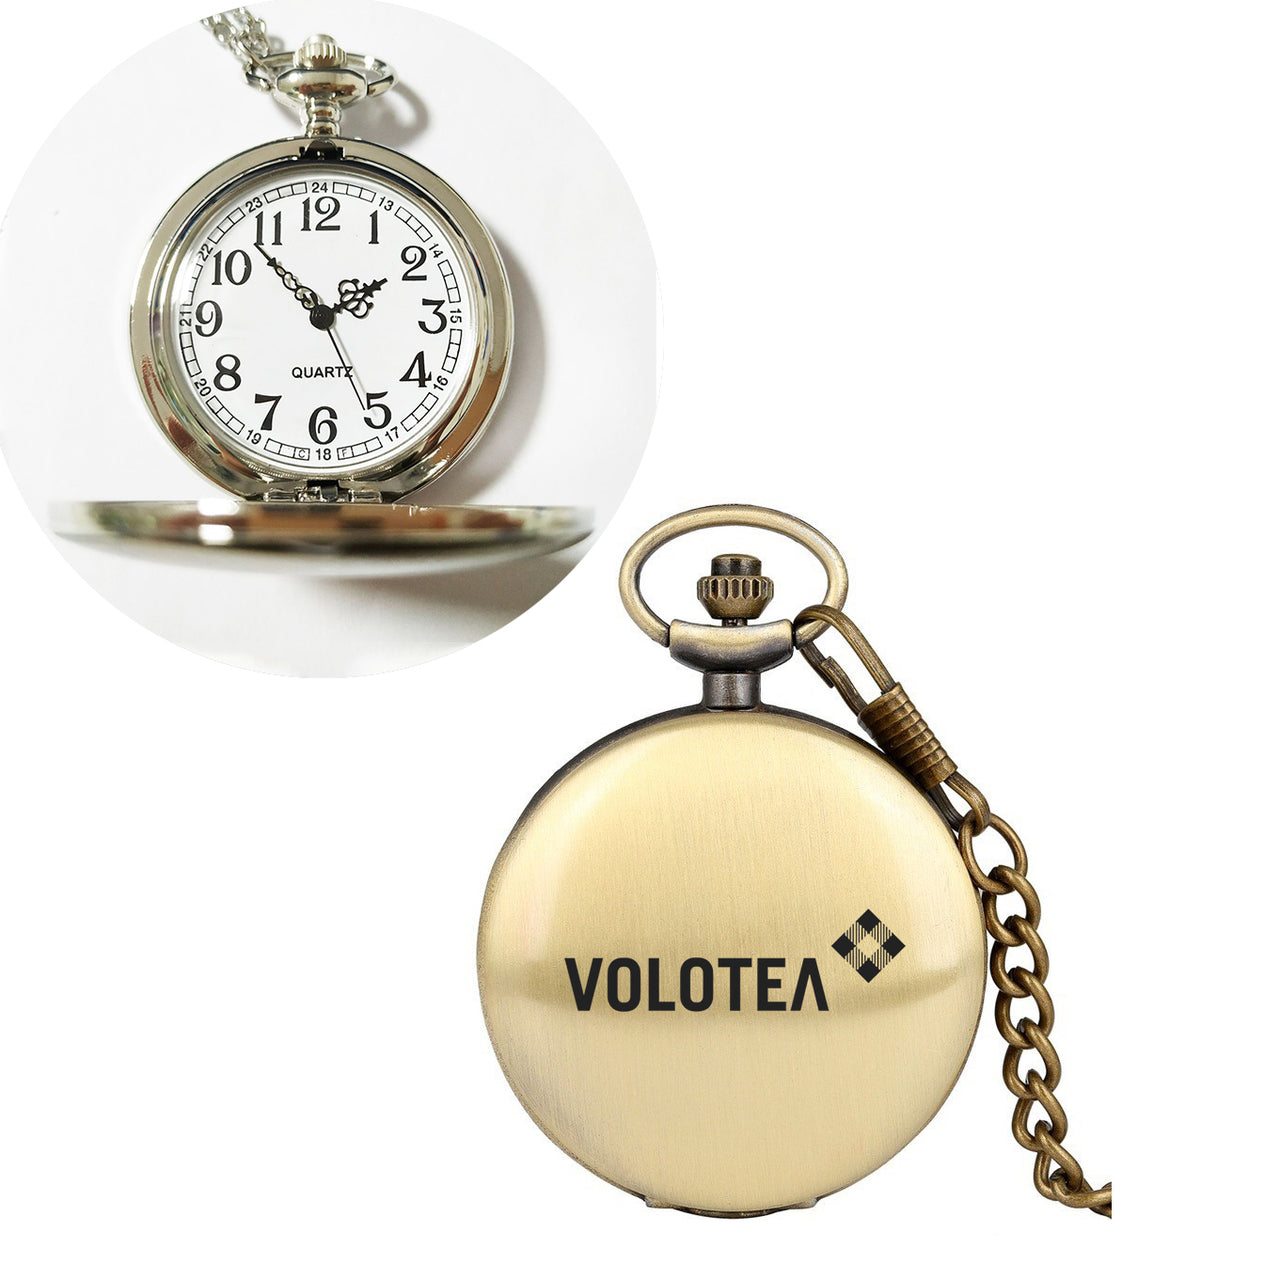 Volotea Airlines Designed Pocket Watches